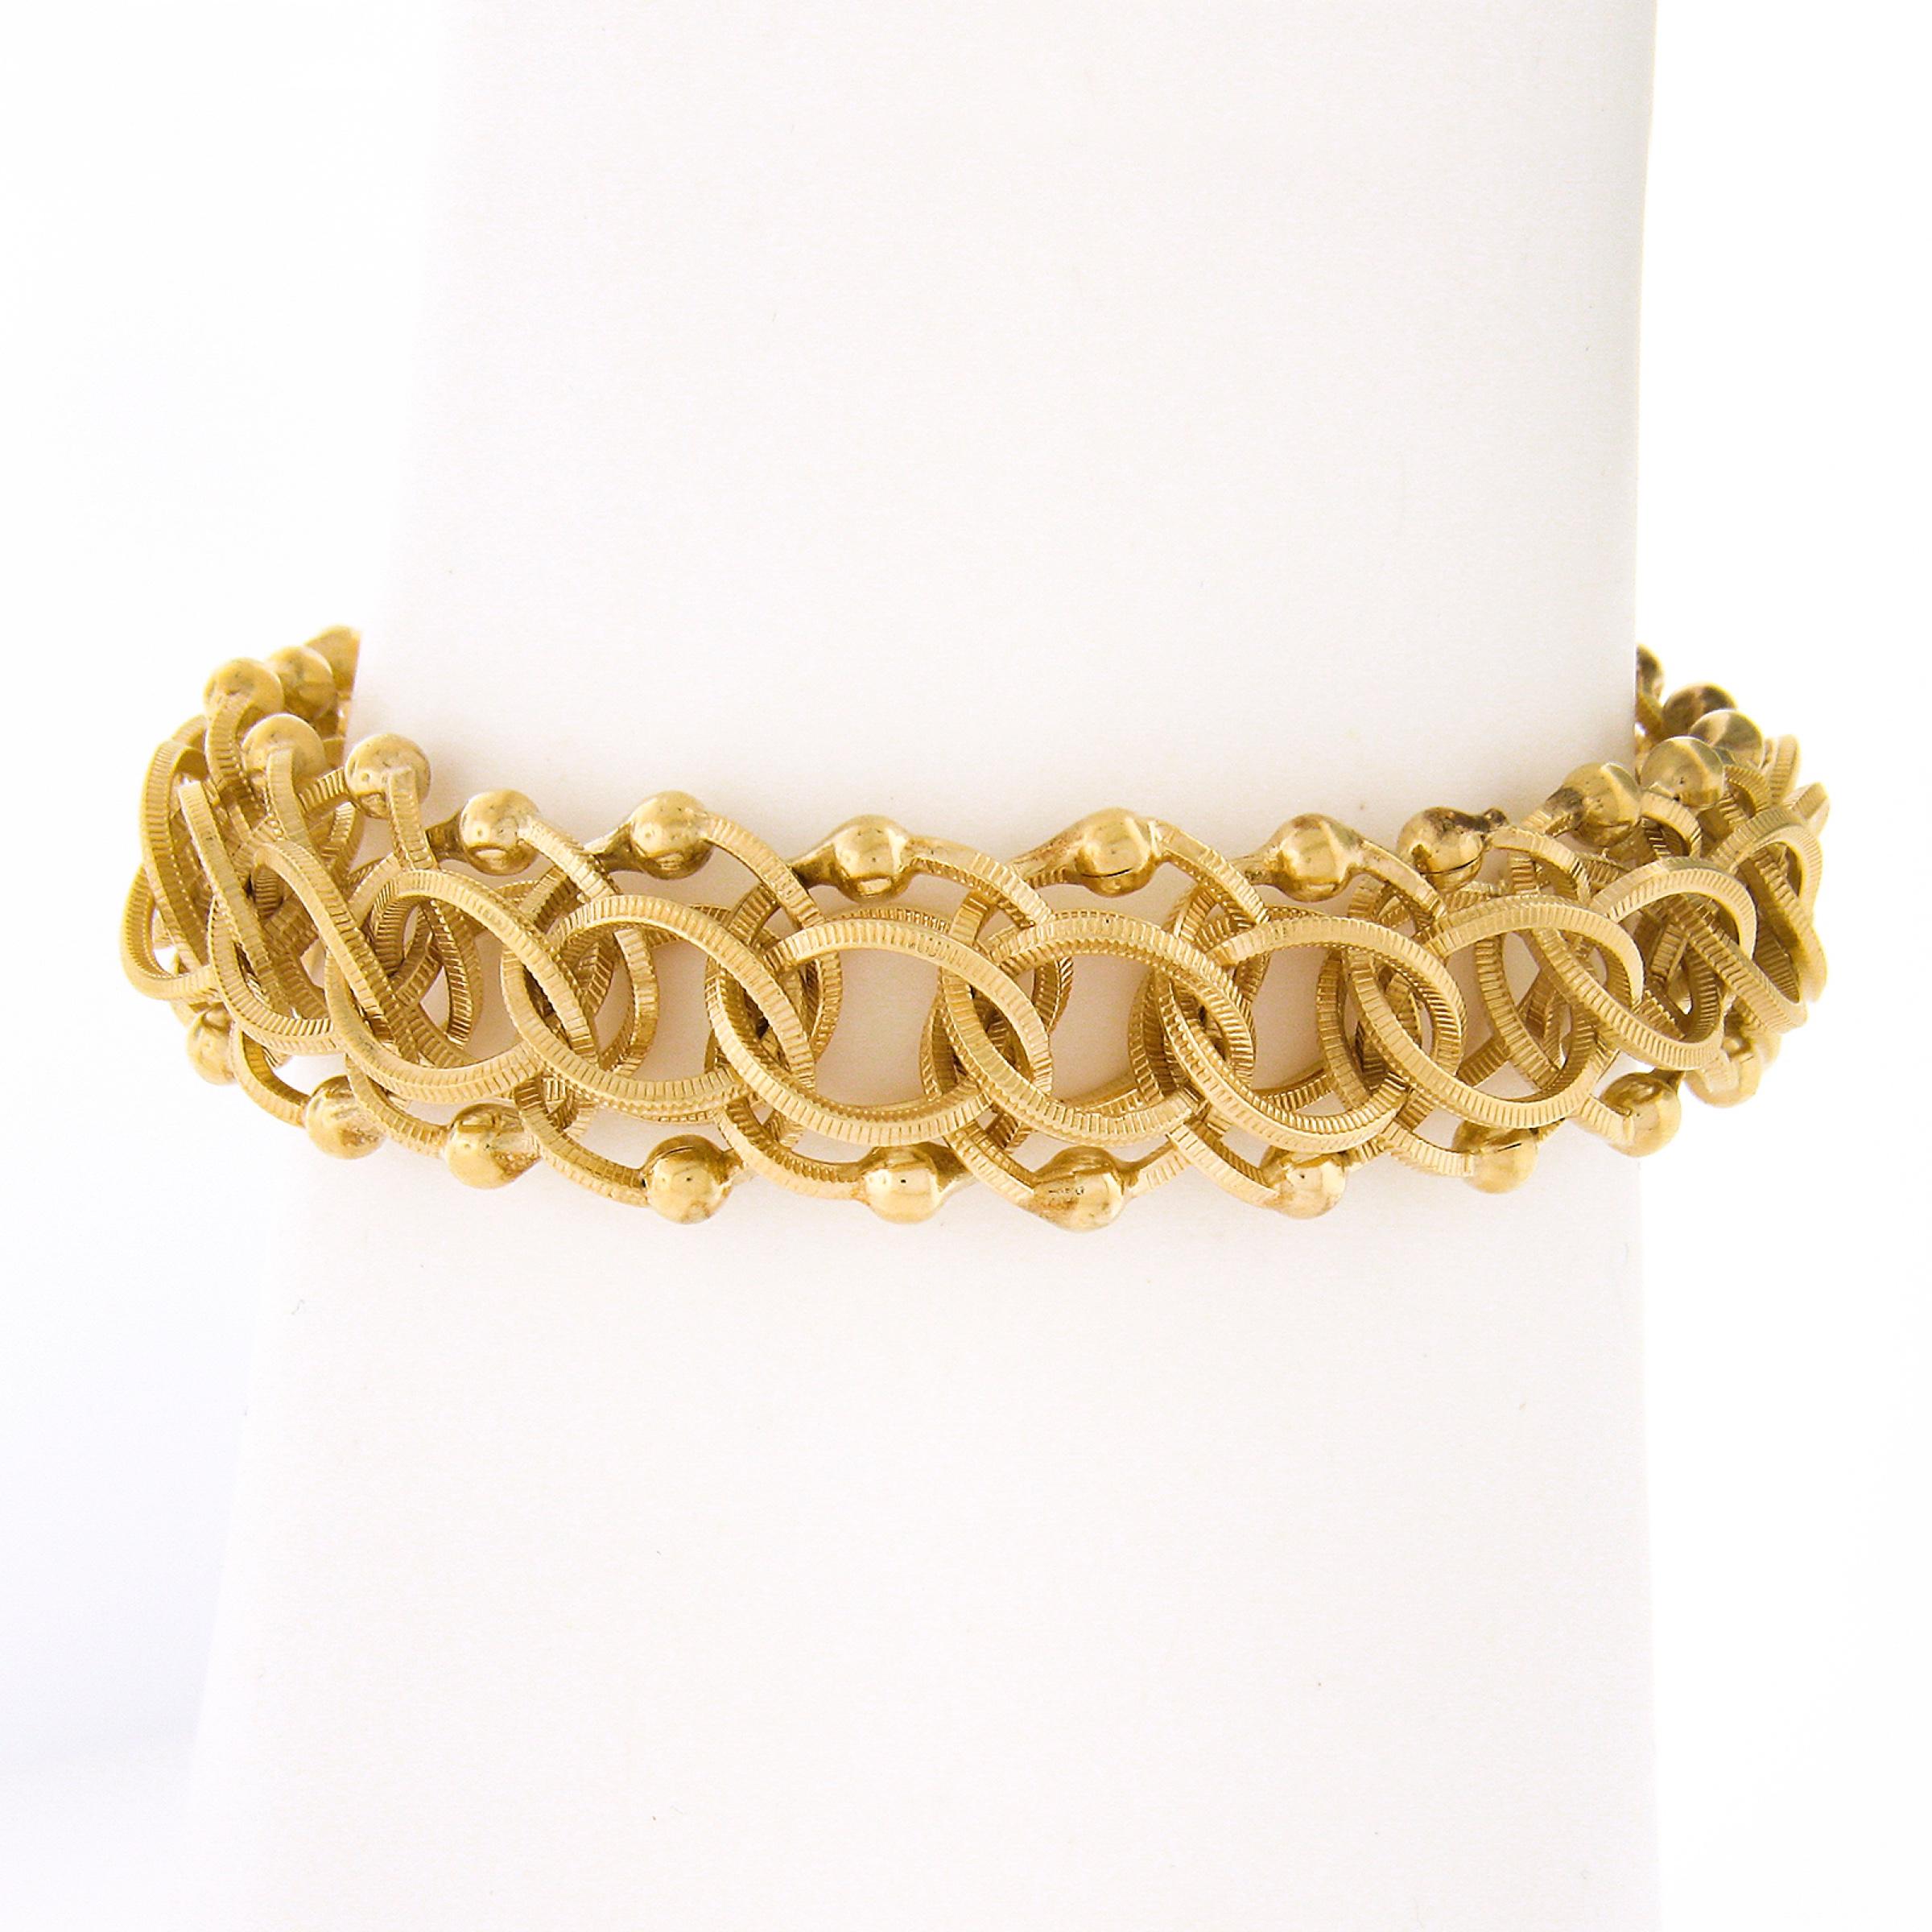 Here we have a gorgeous vintage charm bracelet that is very well crafted in solid 14k yellow gold, featuring a nicely textured double loop open ring link throughout. This fine bracelet lays smoothly on the wrist and looks absolutely bold worn alone